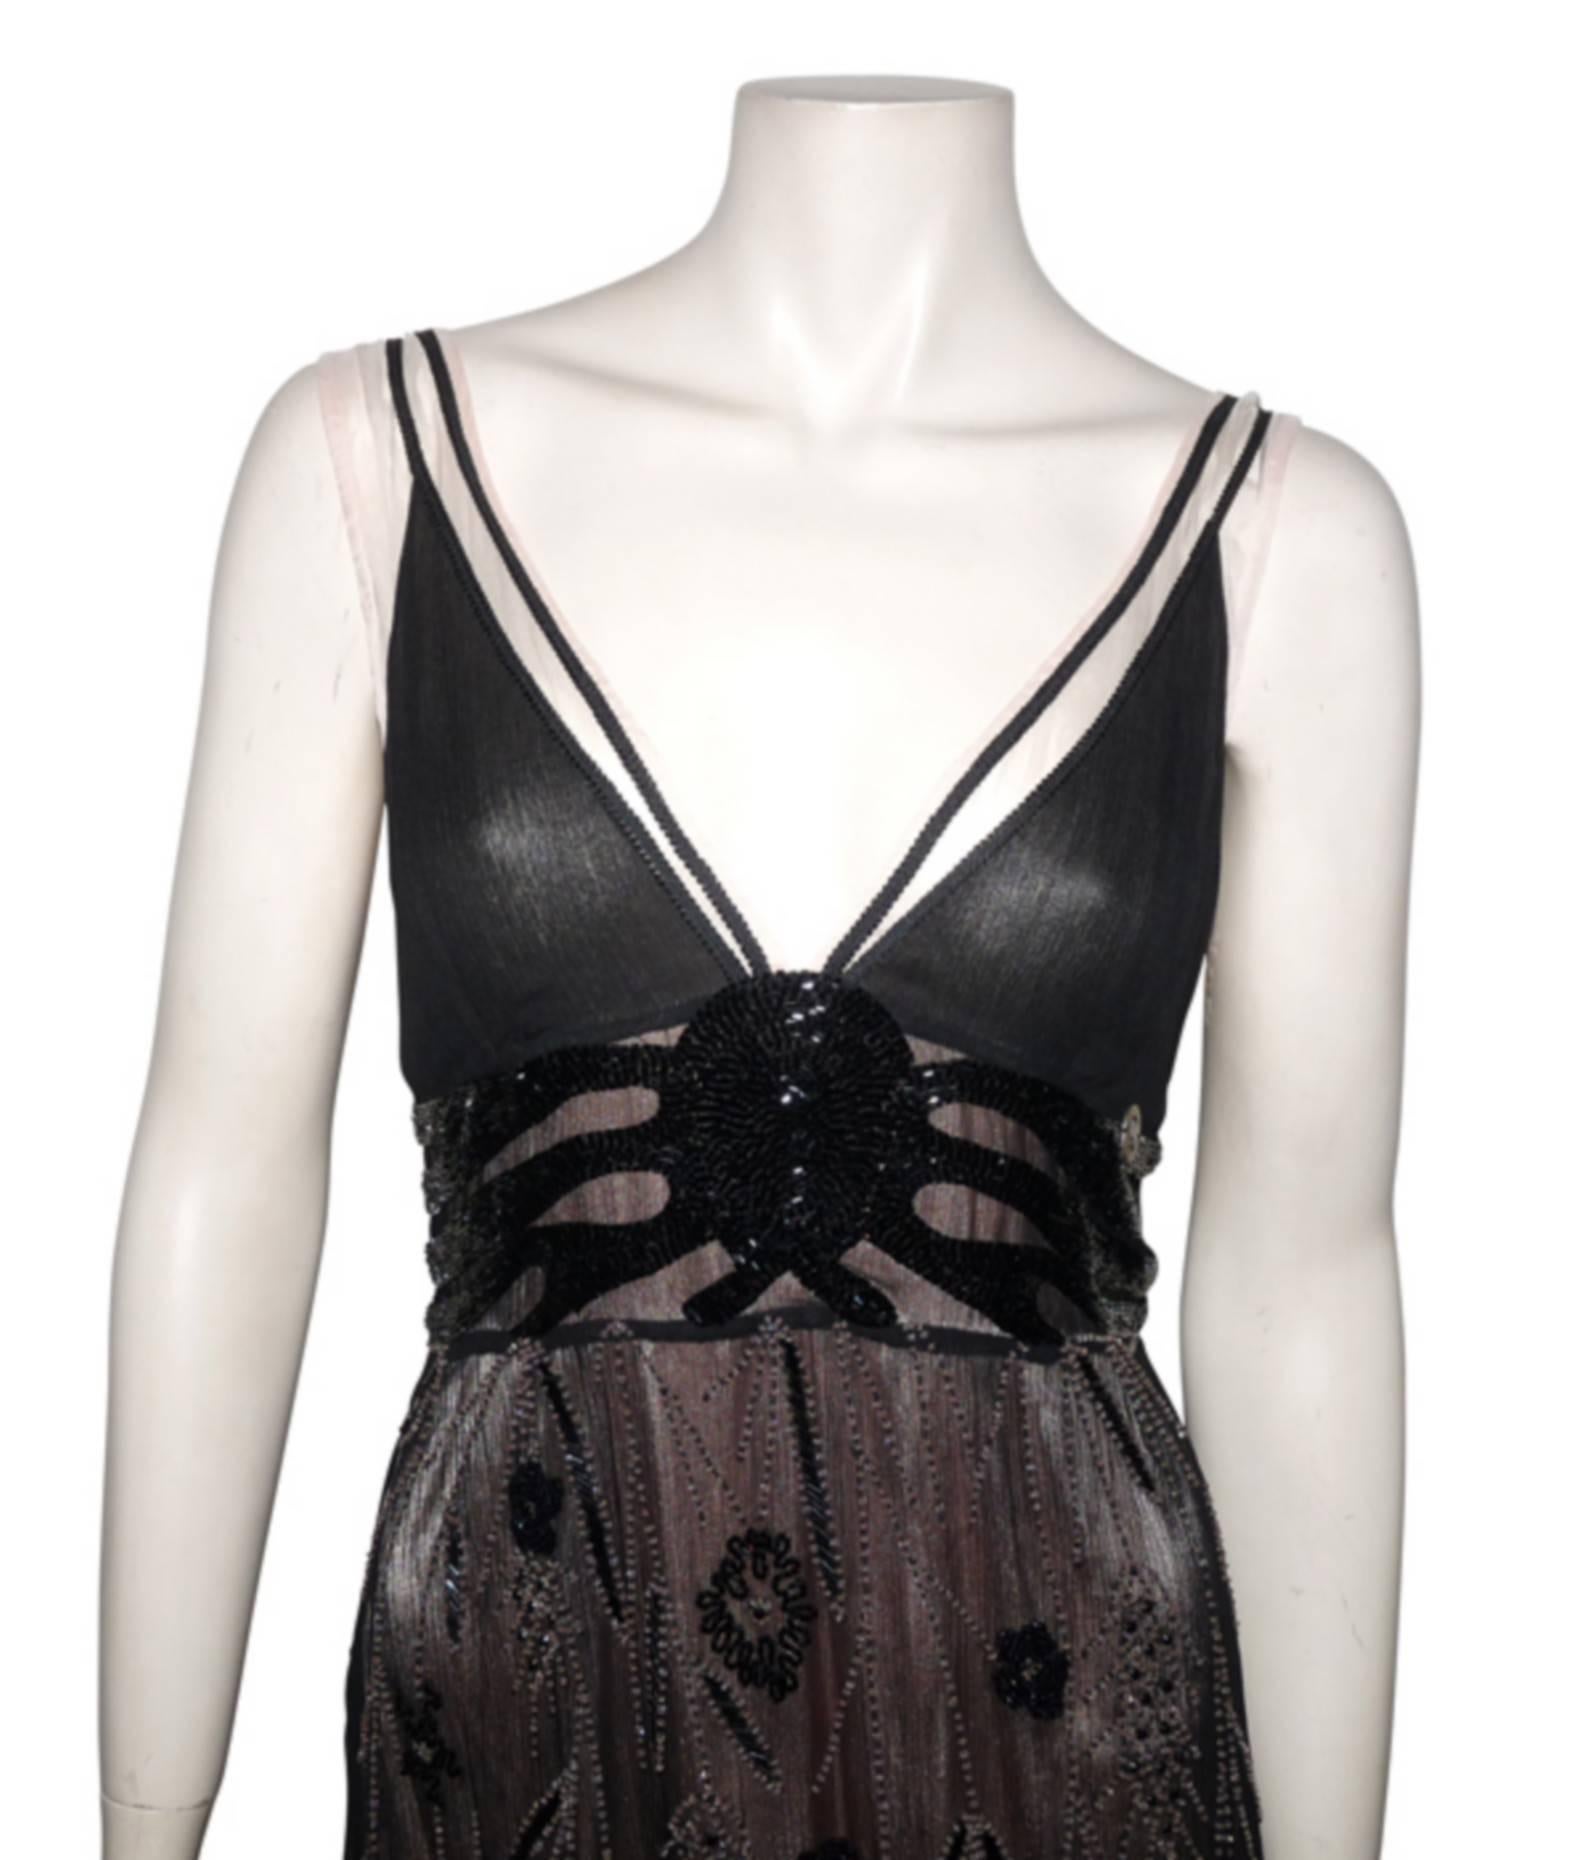 MAGNIFIC strapless black dress that leaves the transparency of its old rose silk base.
V-neckline and waist with a black rosette embroidery.
The bottom part embroidered with fine old pink and black beads.
Zipper.
Composition: 100% silk 
Excellente